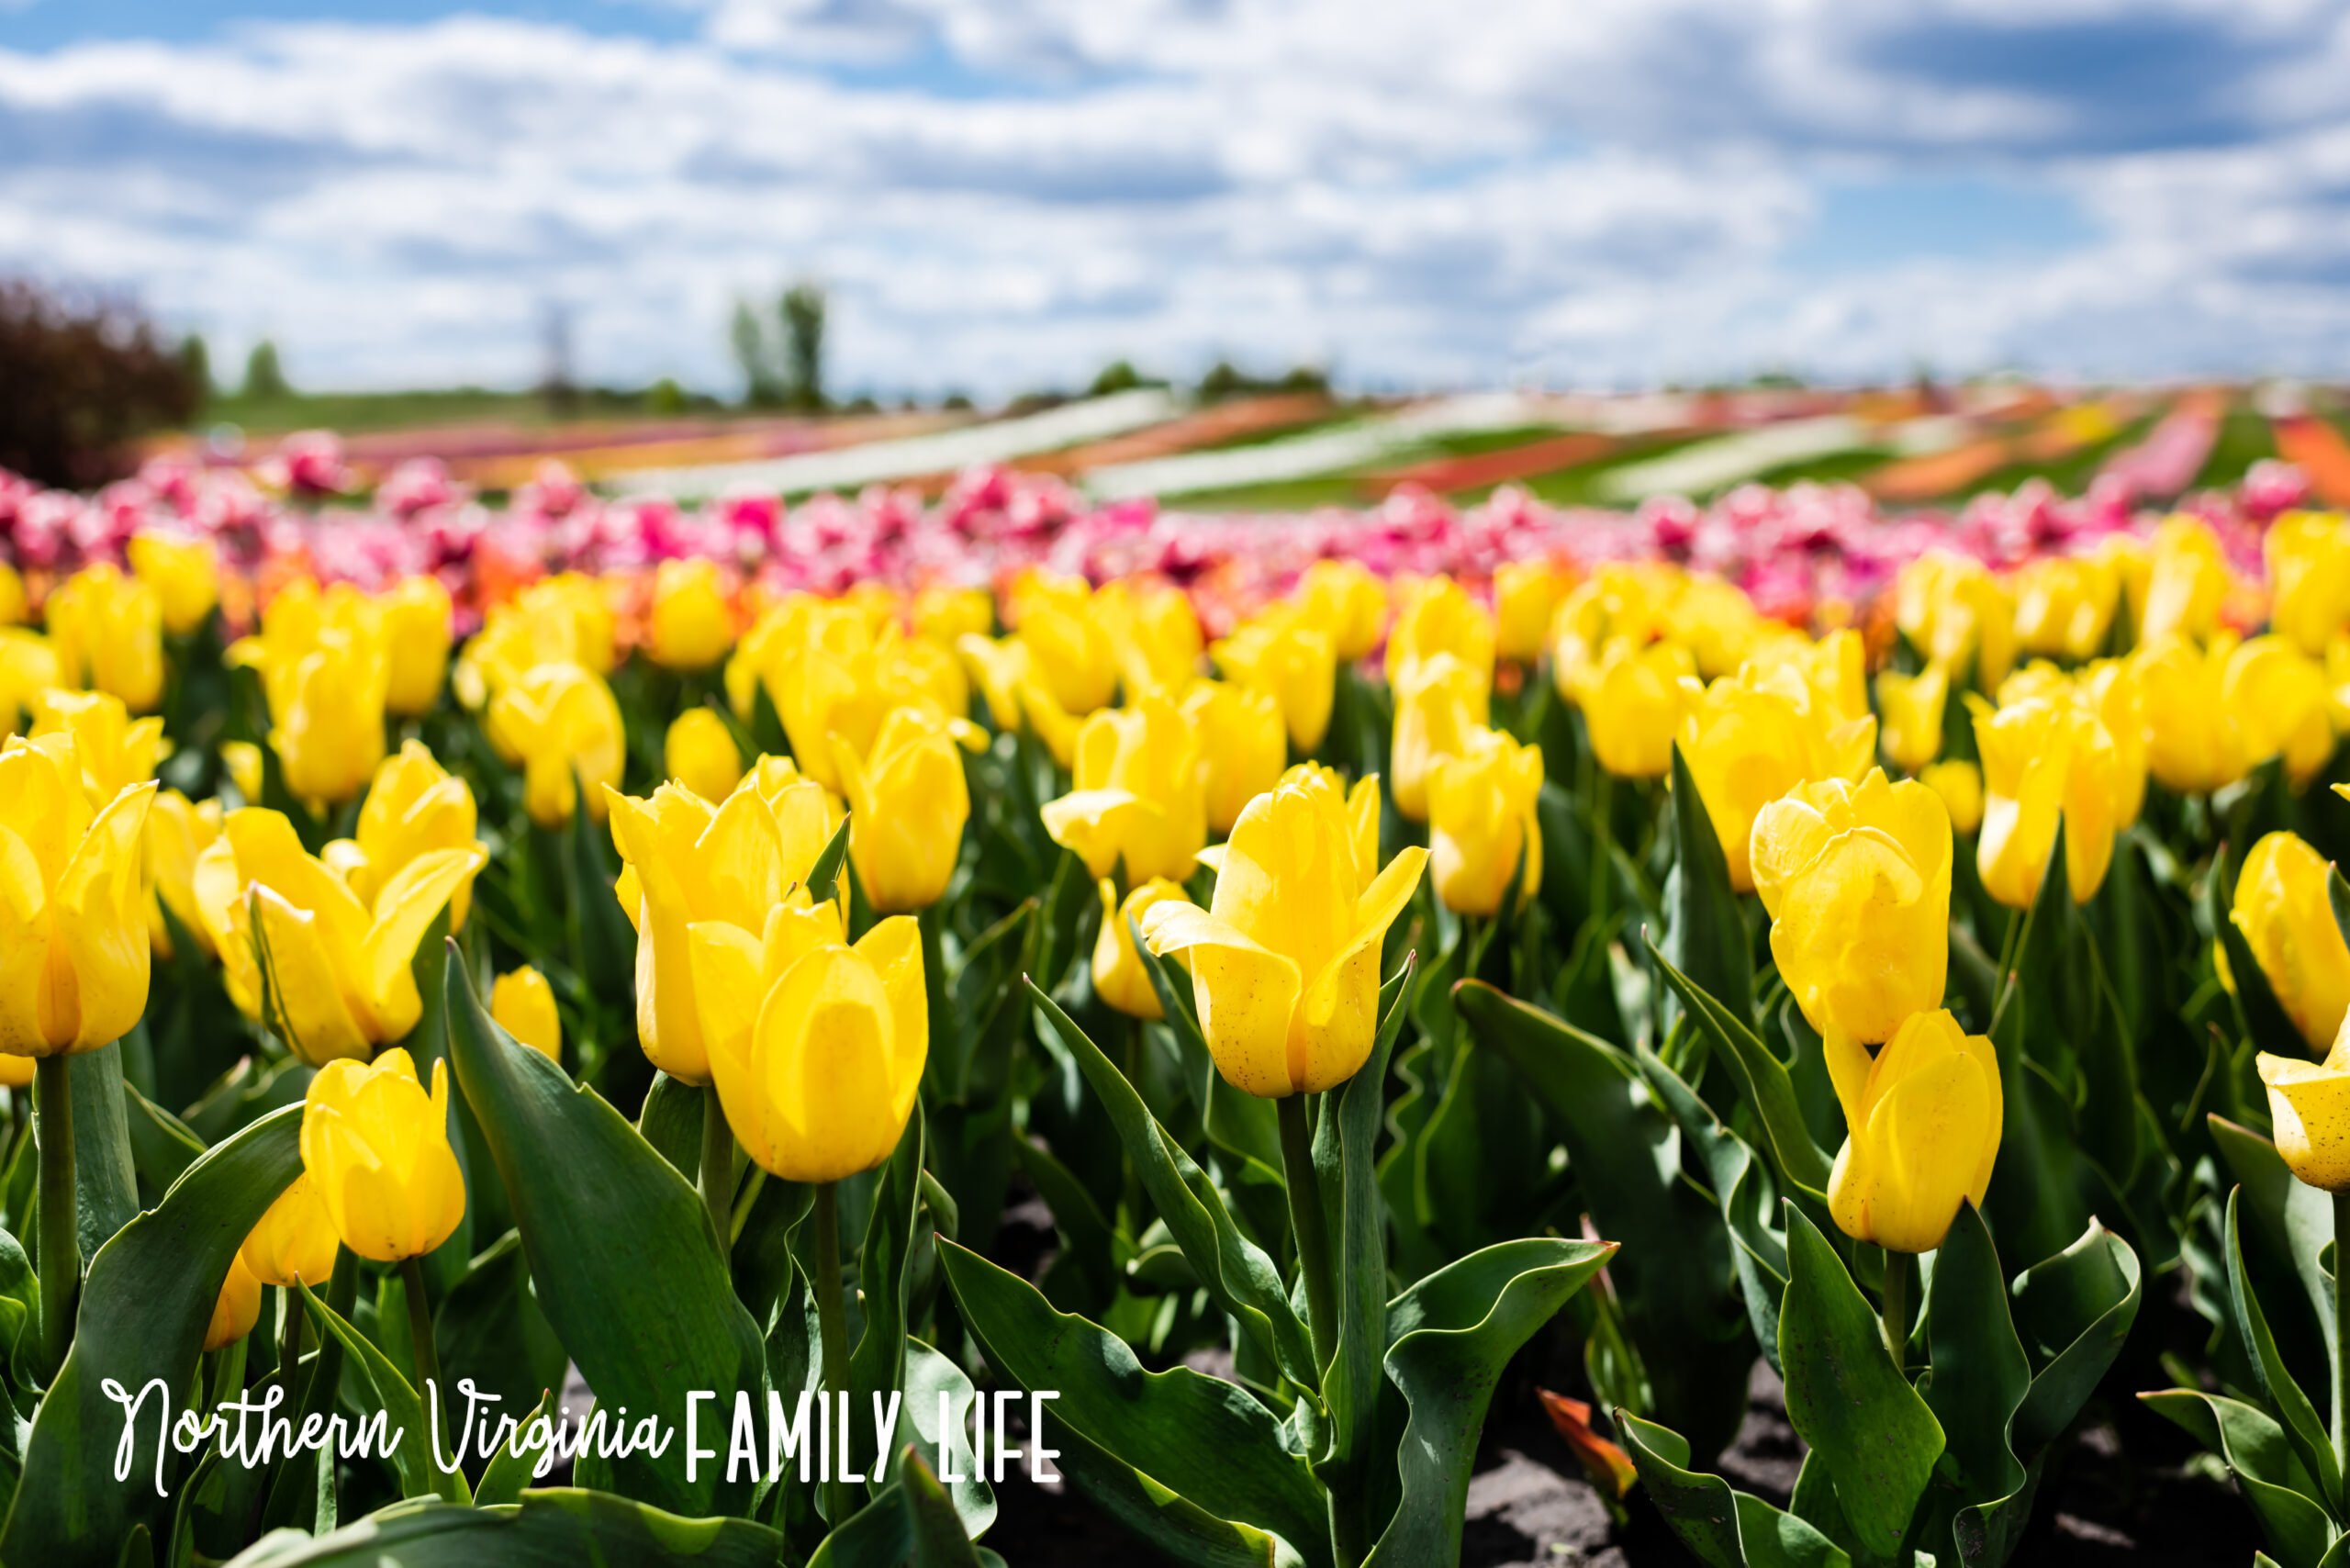 Tulip fields. Visit a field of flowers in Northern Virginia to get great tulip pics!